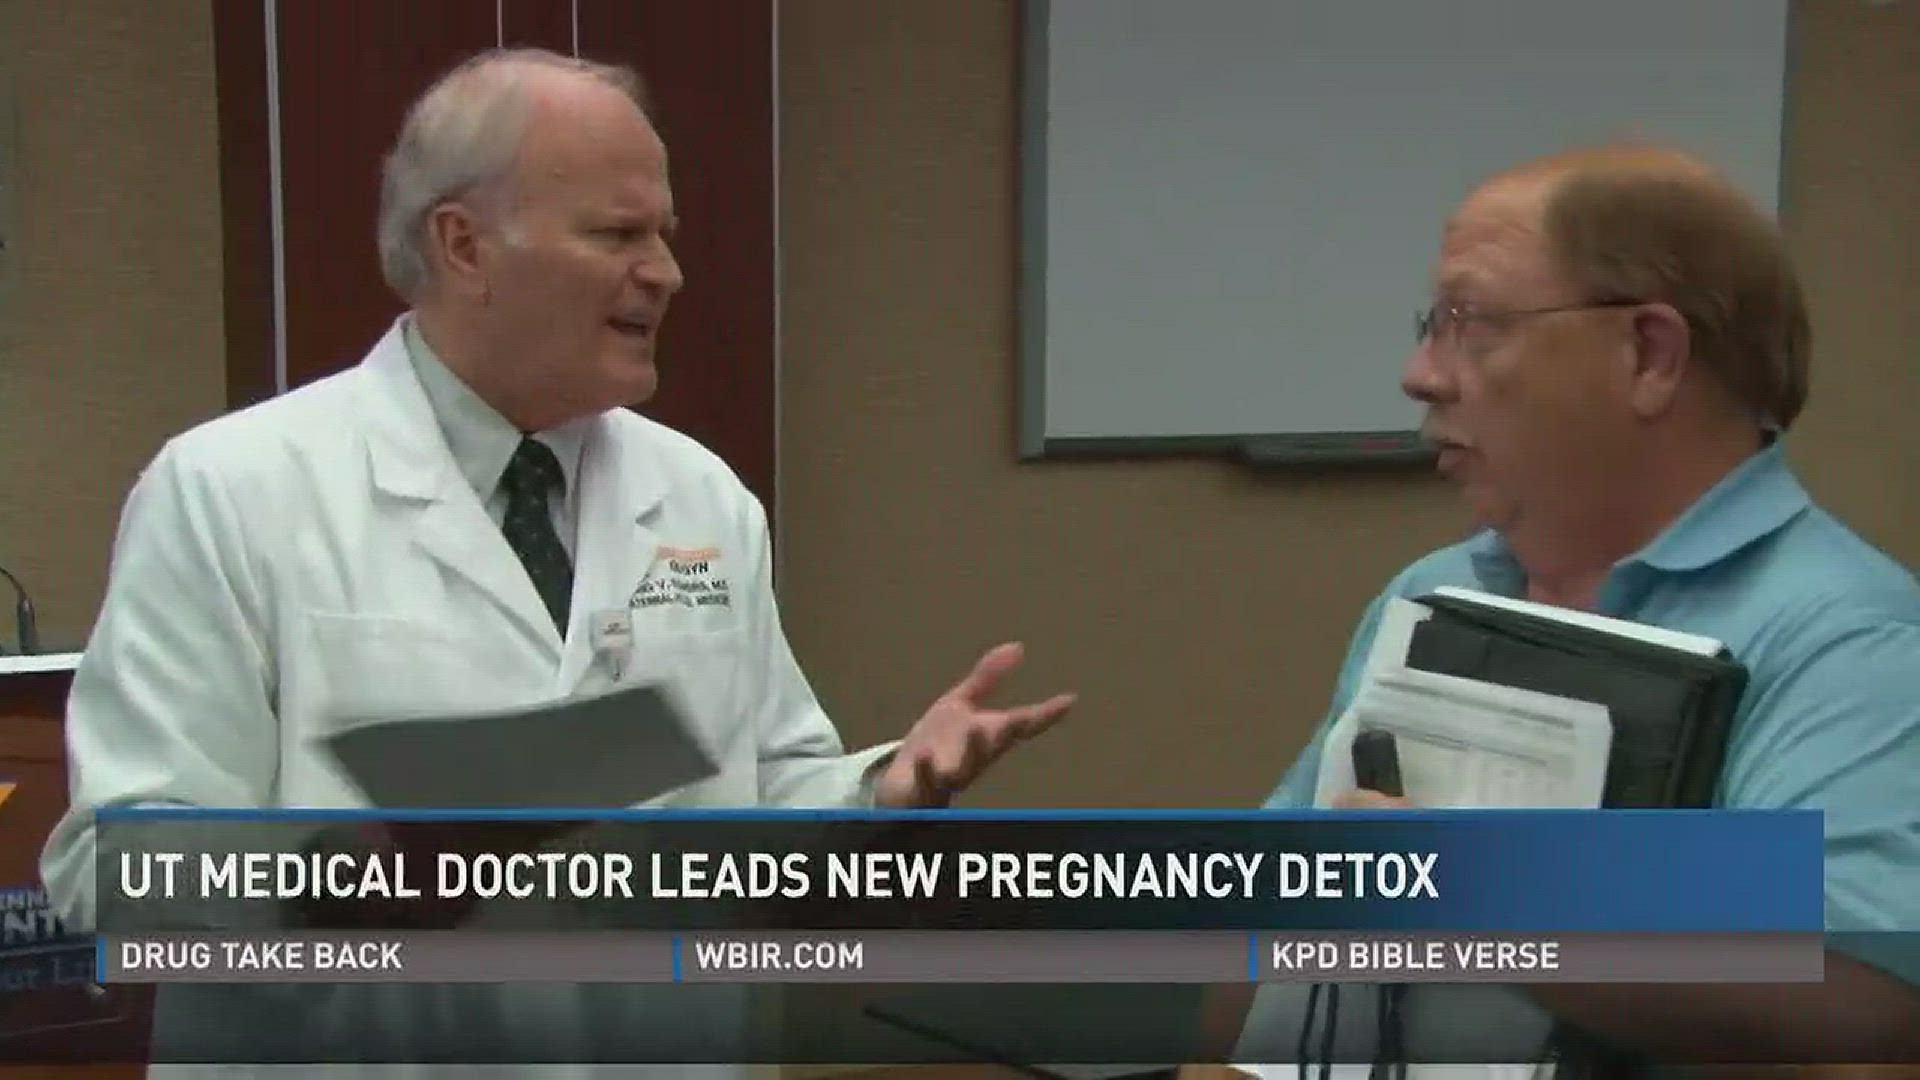 July 26, 2017: A doctor at UT Medical Center is pioneering research about how pregnant women should detox from opioid addiction.